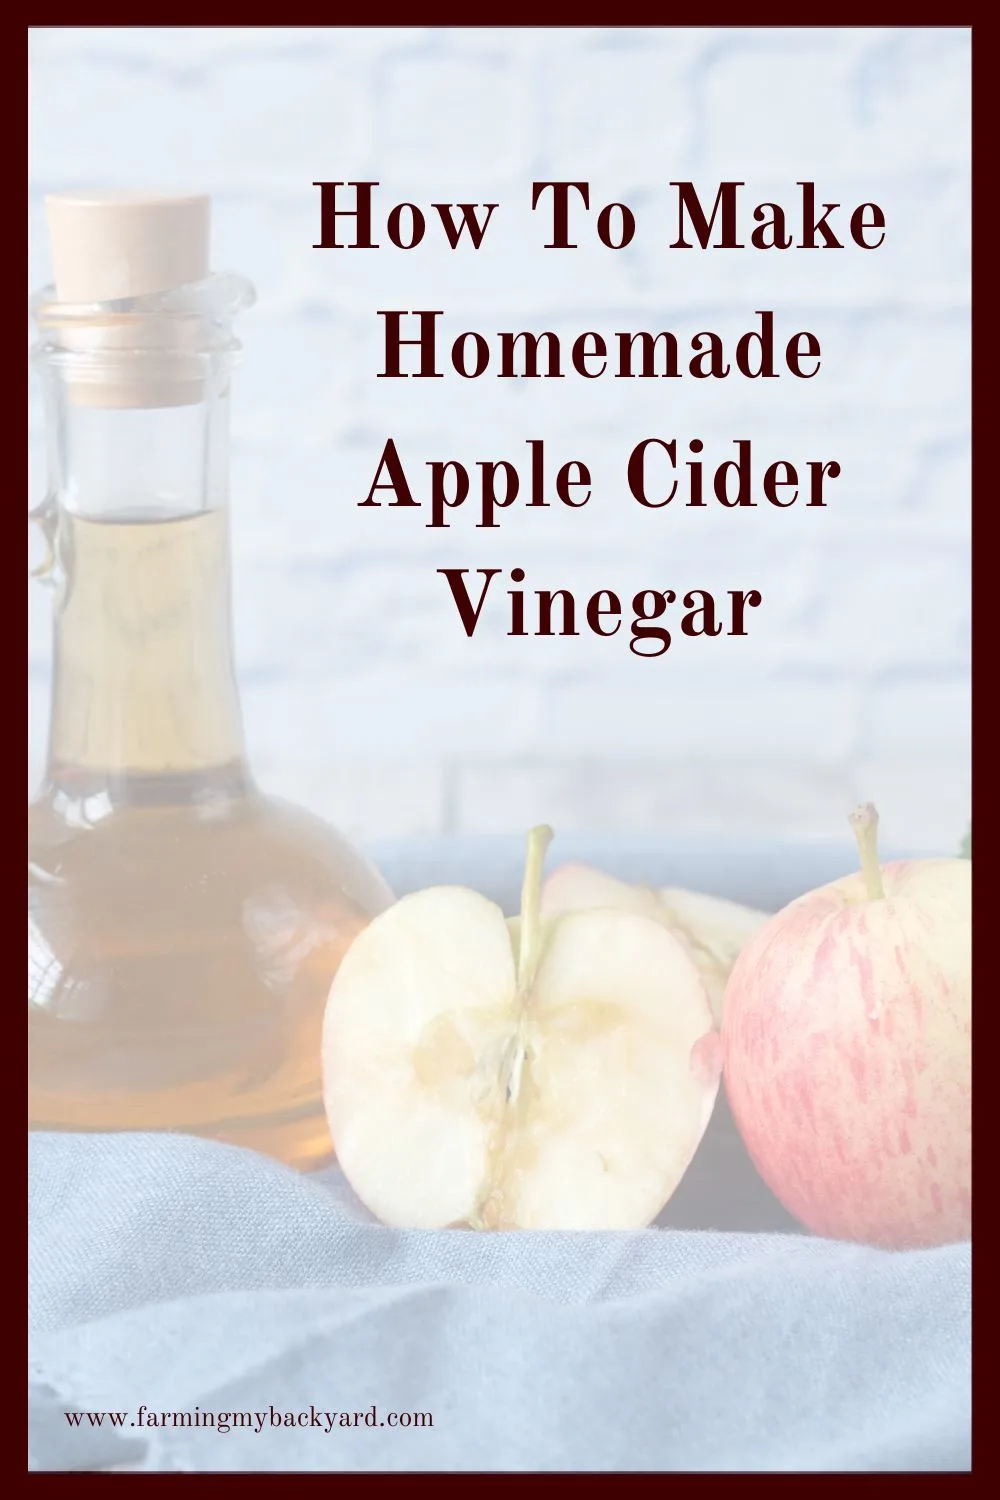 Homemade apple cider vinegar is super easy and takes about two seconds to start. You can produce yet another food at home in your kitchen AND use something that is otherwise considered waste.